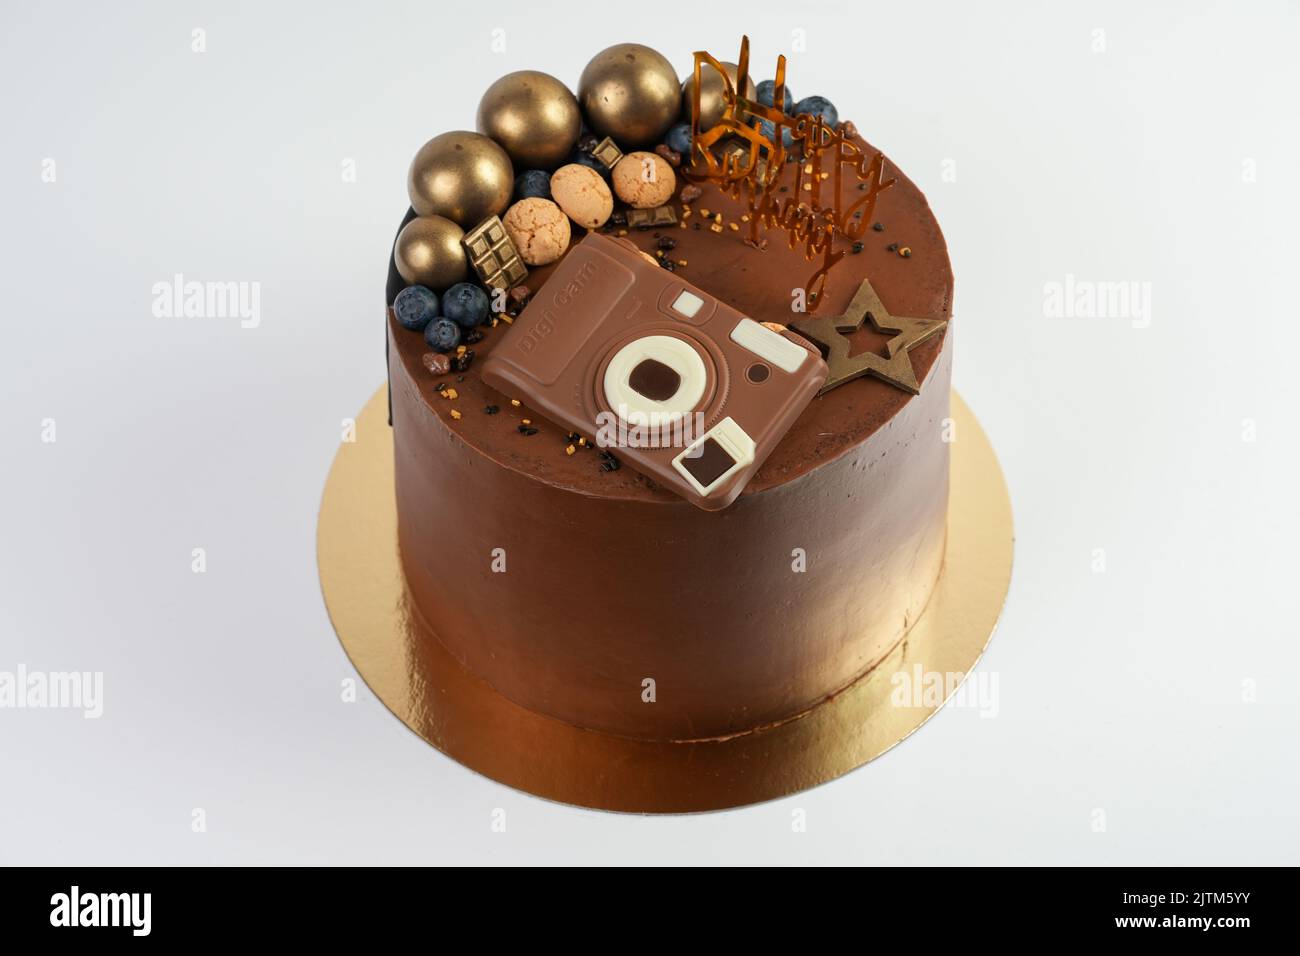 The birthday chocolate cake with golden balls and camera shape ...